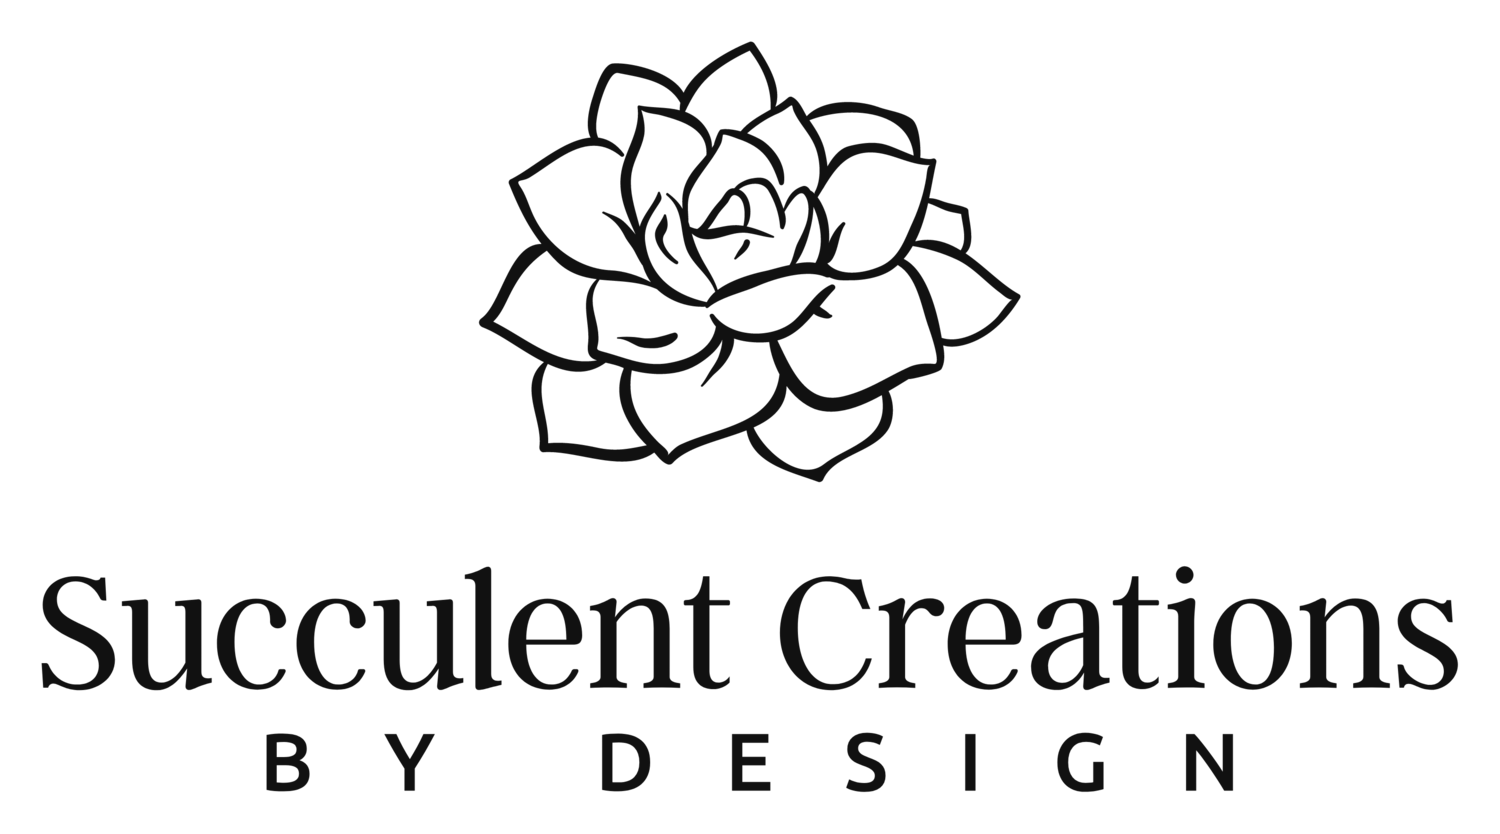 Succulent Creations by Design